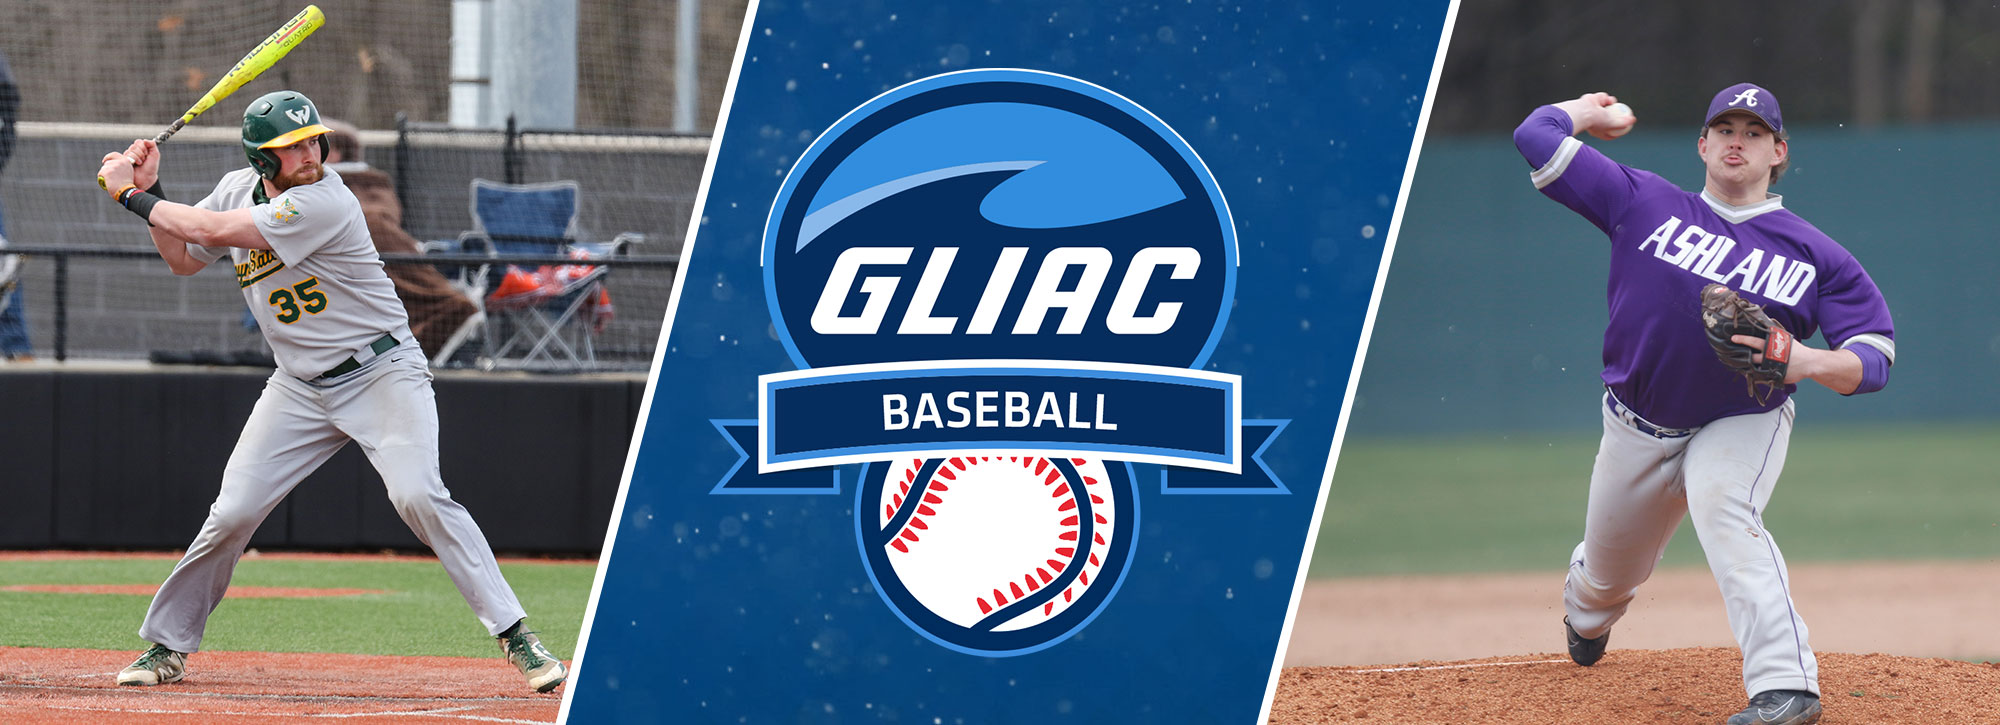 Wayne State's Kelly, Ashland's Peters Collect GLIAC Baseball Players of the Week Honors